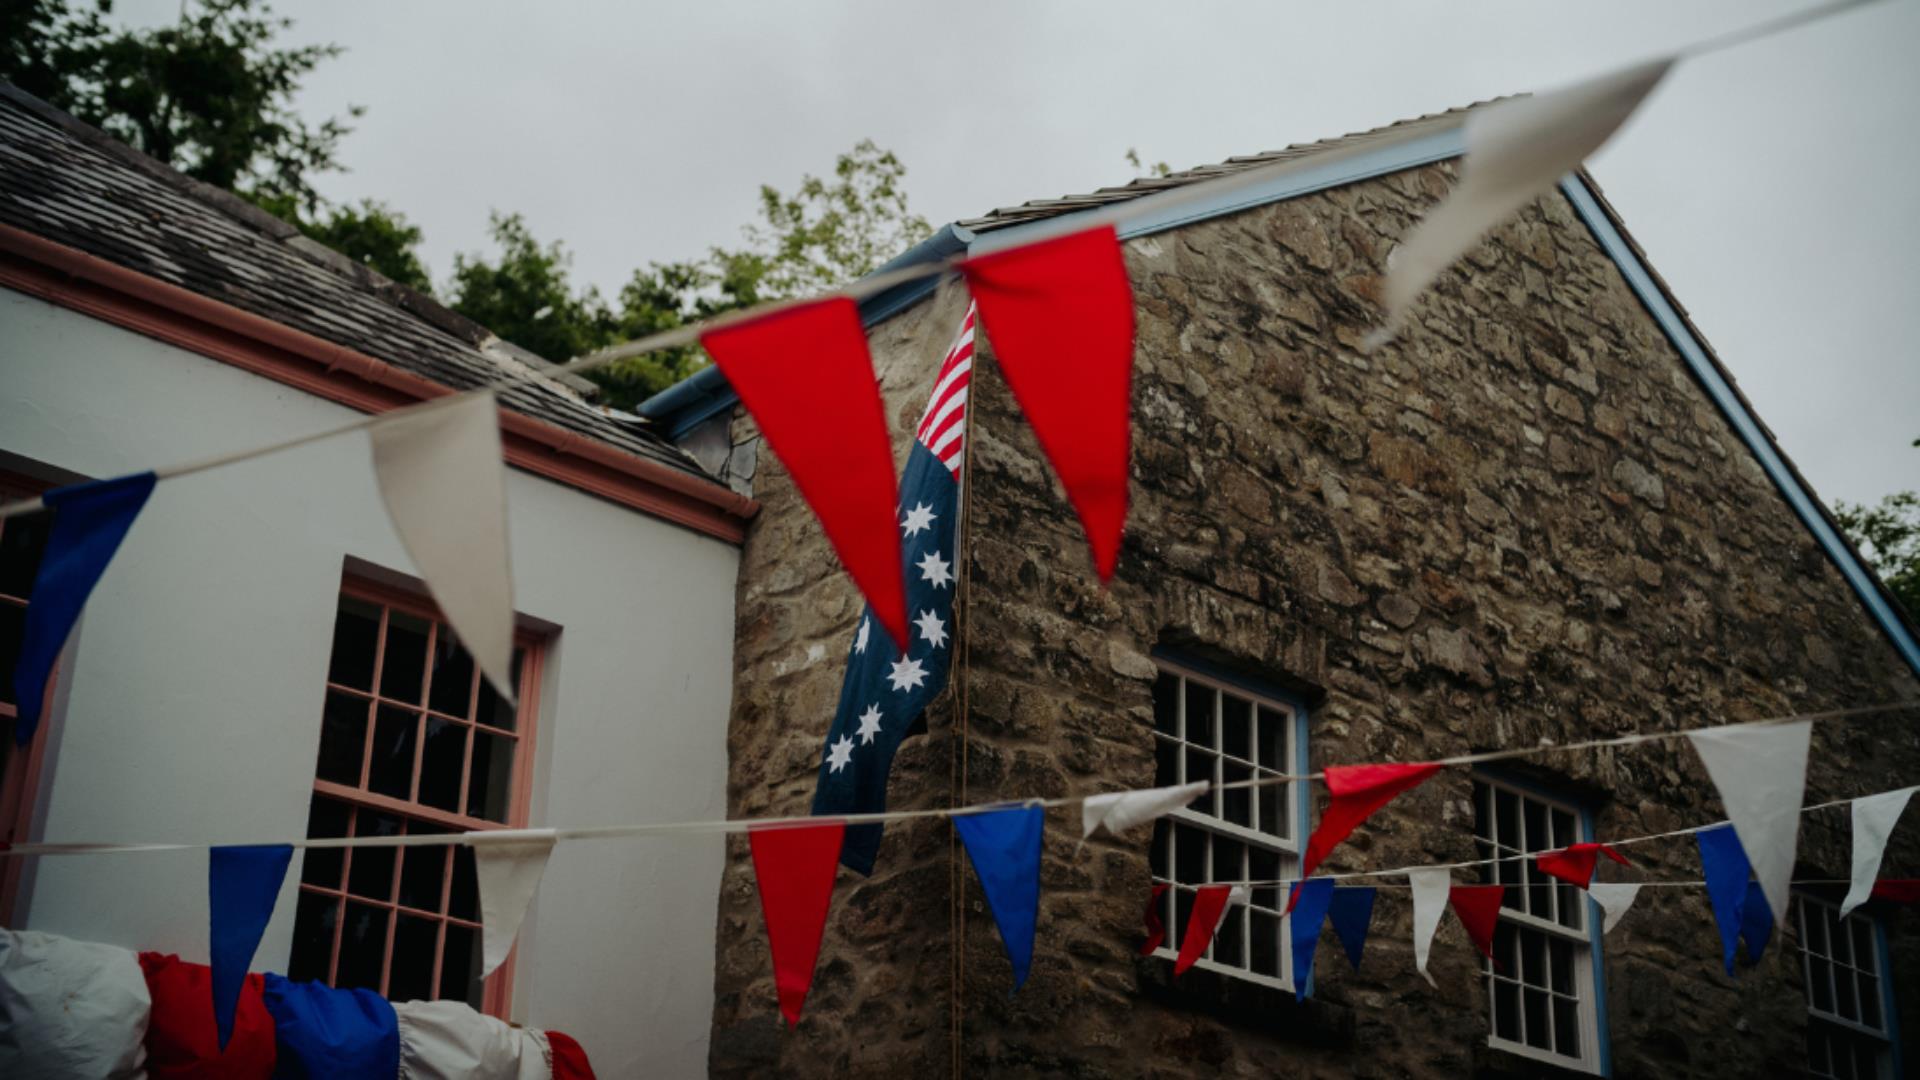 American Independence Weekend at the Ulster American Folk Park